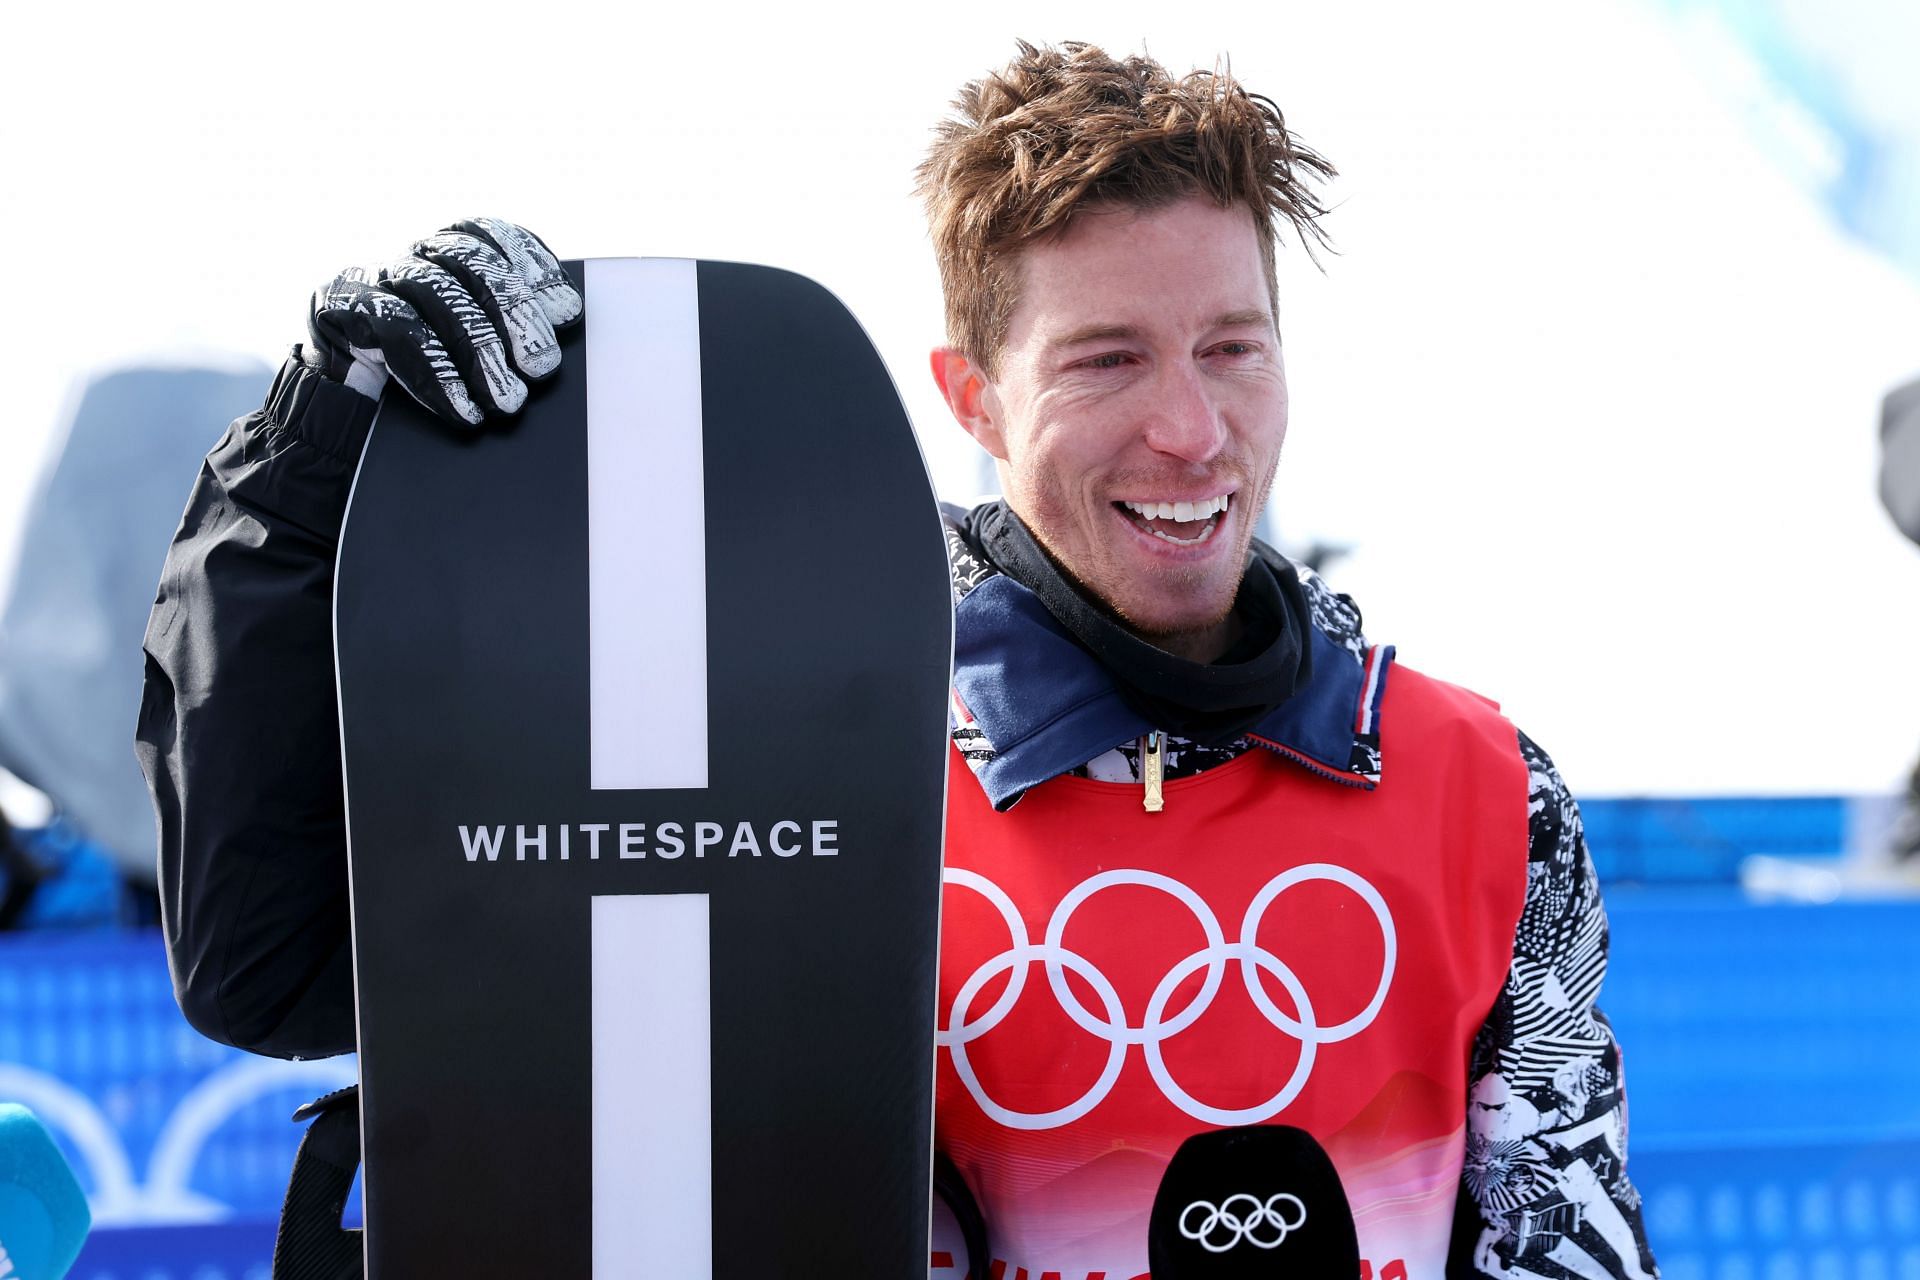 Shaun White with the press after finishing fourth during the Men&#039;s Snowboard Halfpipe Final at the 2022 Winter Olympics in Zhangjiakou, China.